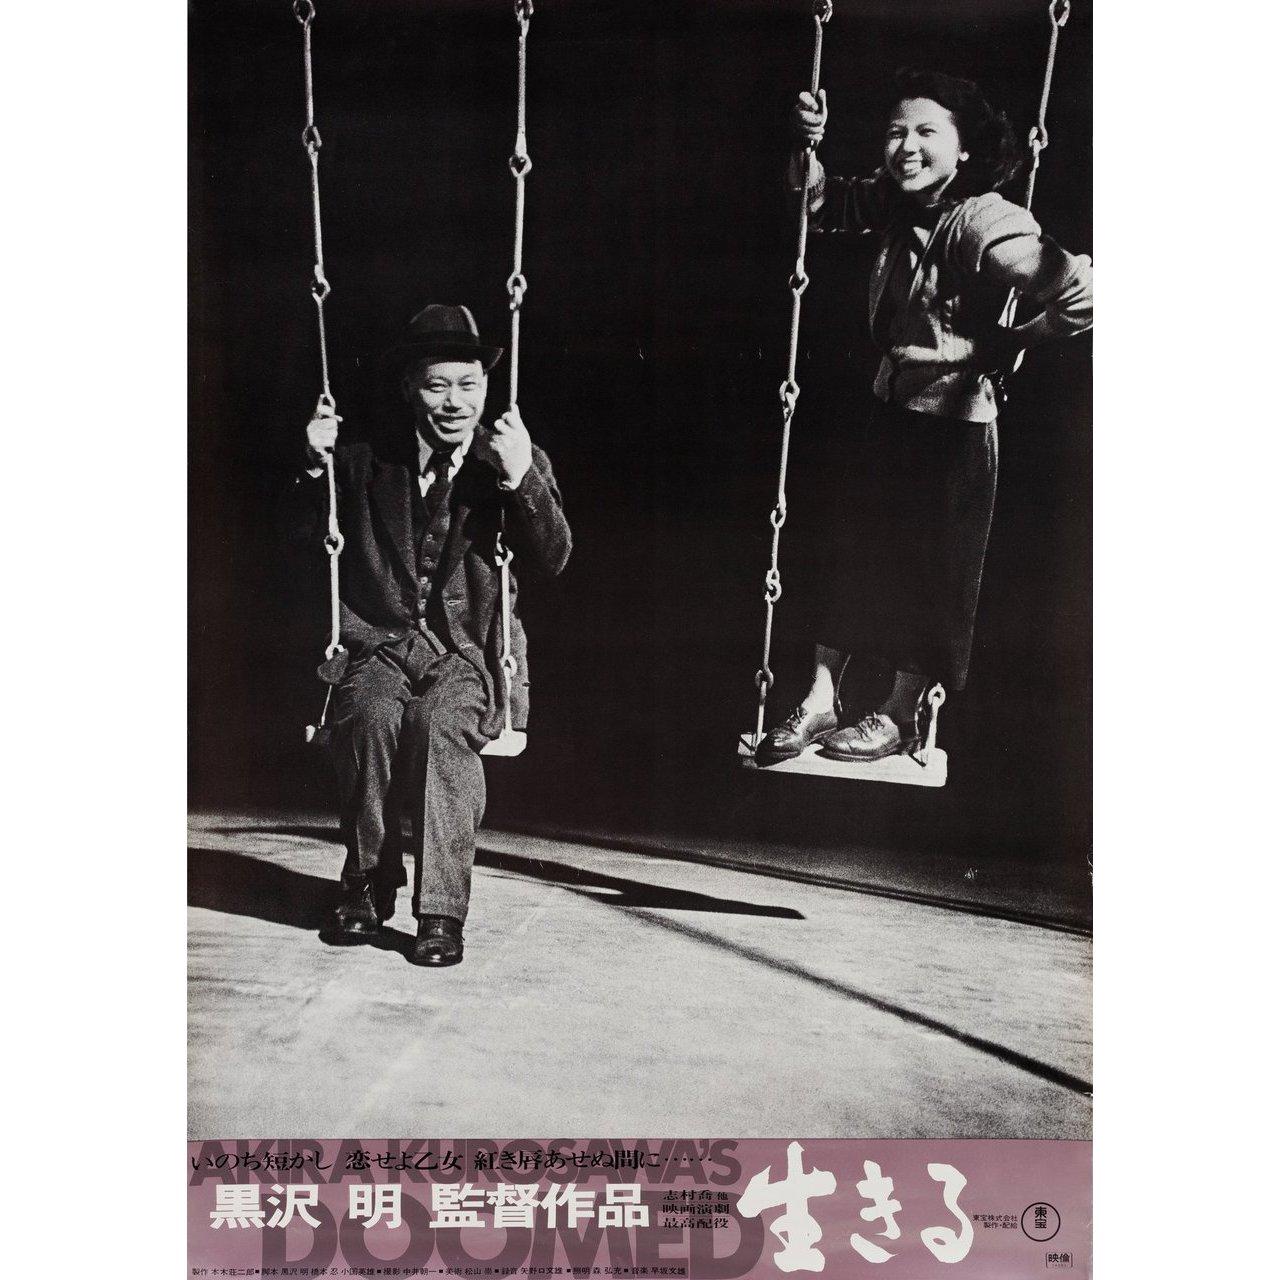 Original 1974 re-release Japanese B2 poster for the 1952 film Ikiru (Doomed) directed by Akira Kurosawa with Takashi Shimura / Shin'ichi Himori / Haruo Tanaka / Minoru Chiaki. Fine condition, rolled. Please note: the size is stated in inches and the